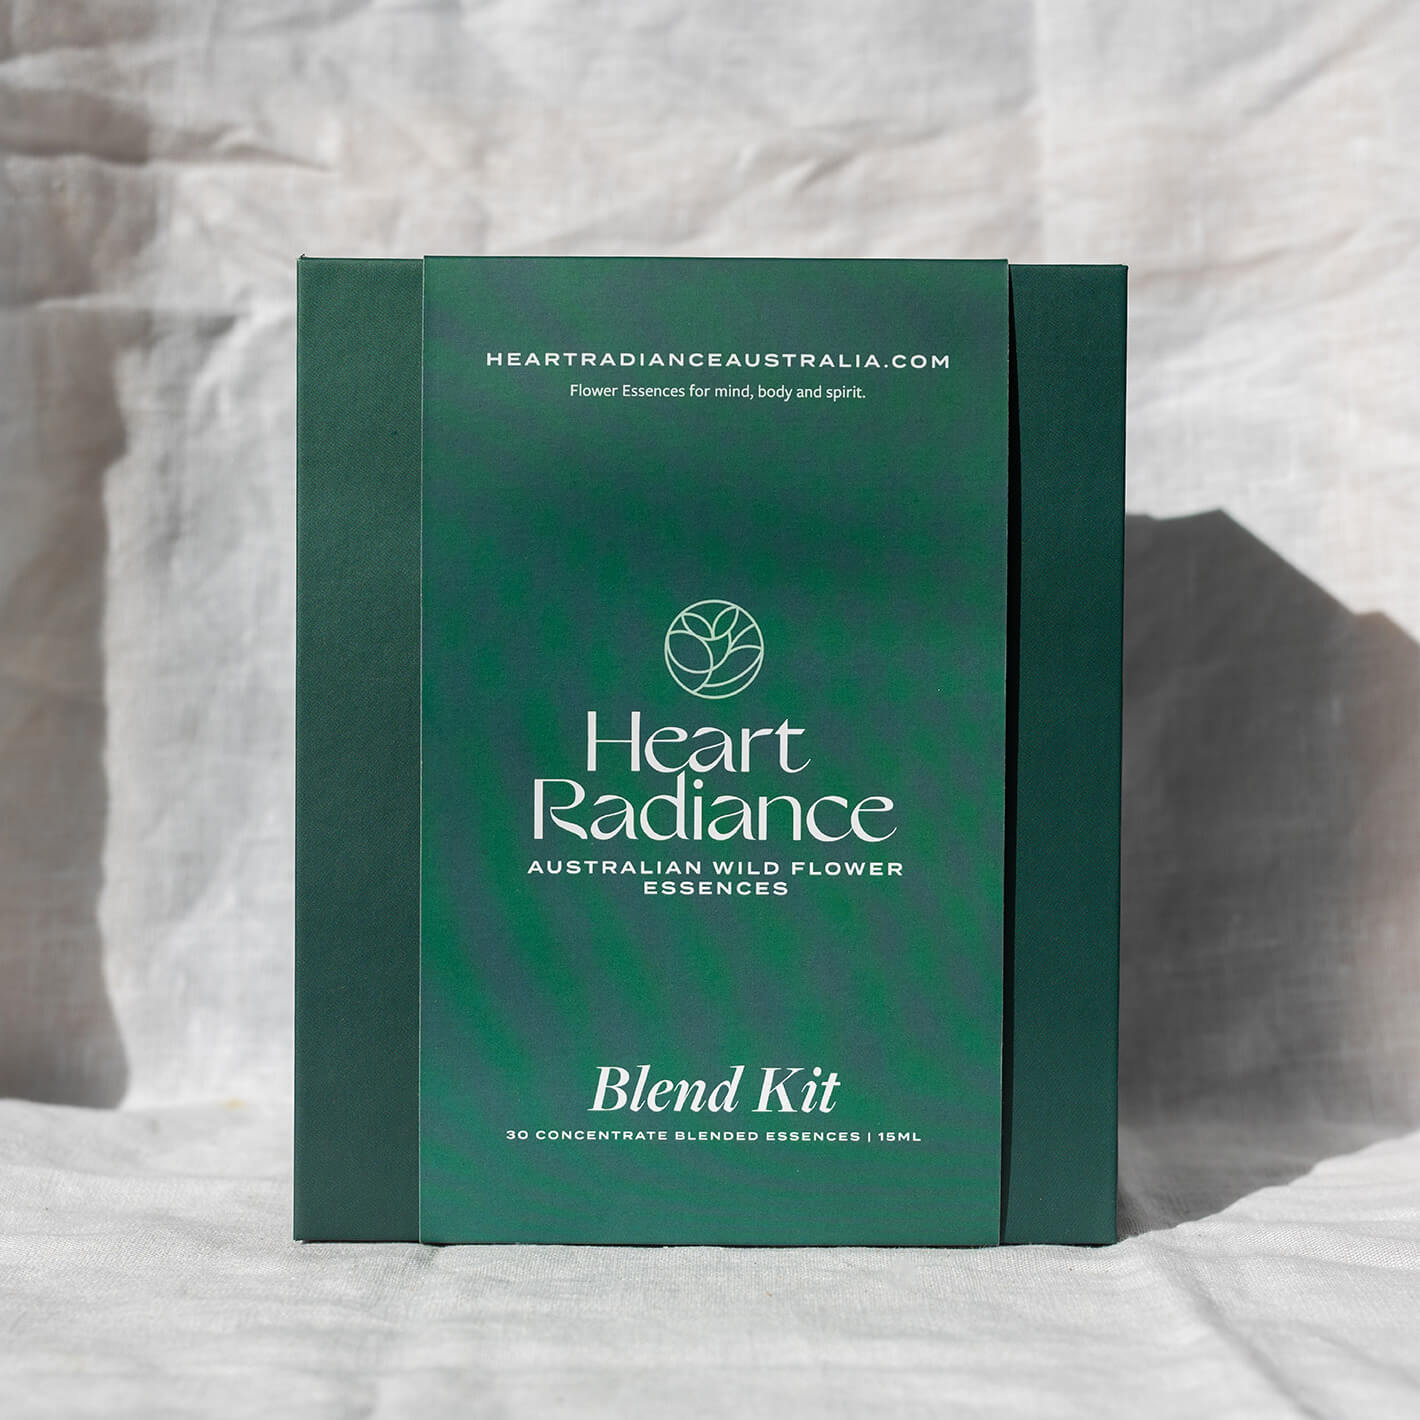 Brand identity case study image of the HeartRadiance kit box in front of a white background. The deep green box features a green belly band with elegant white typography.